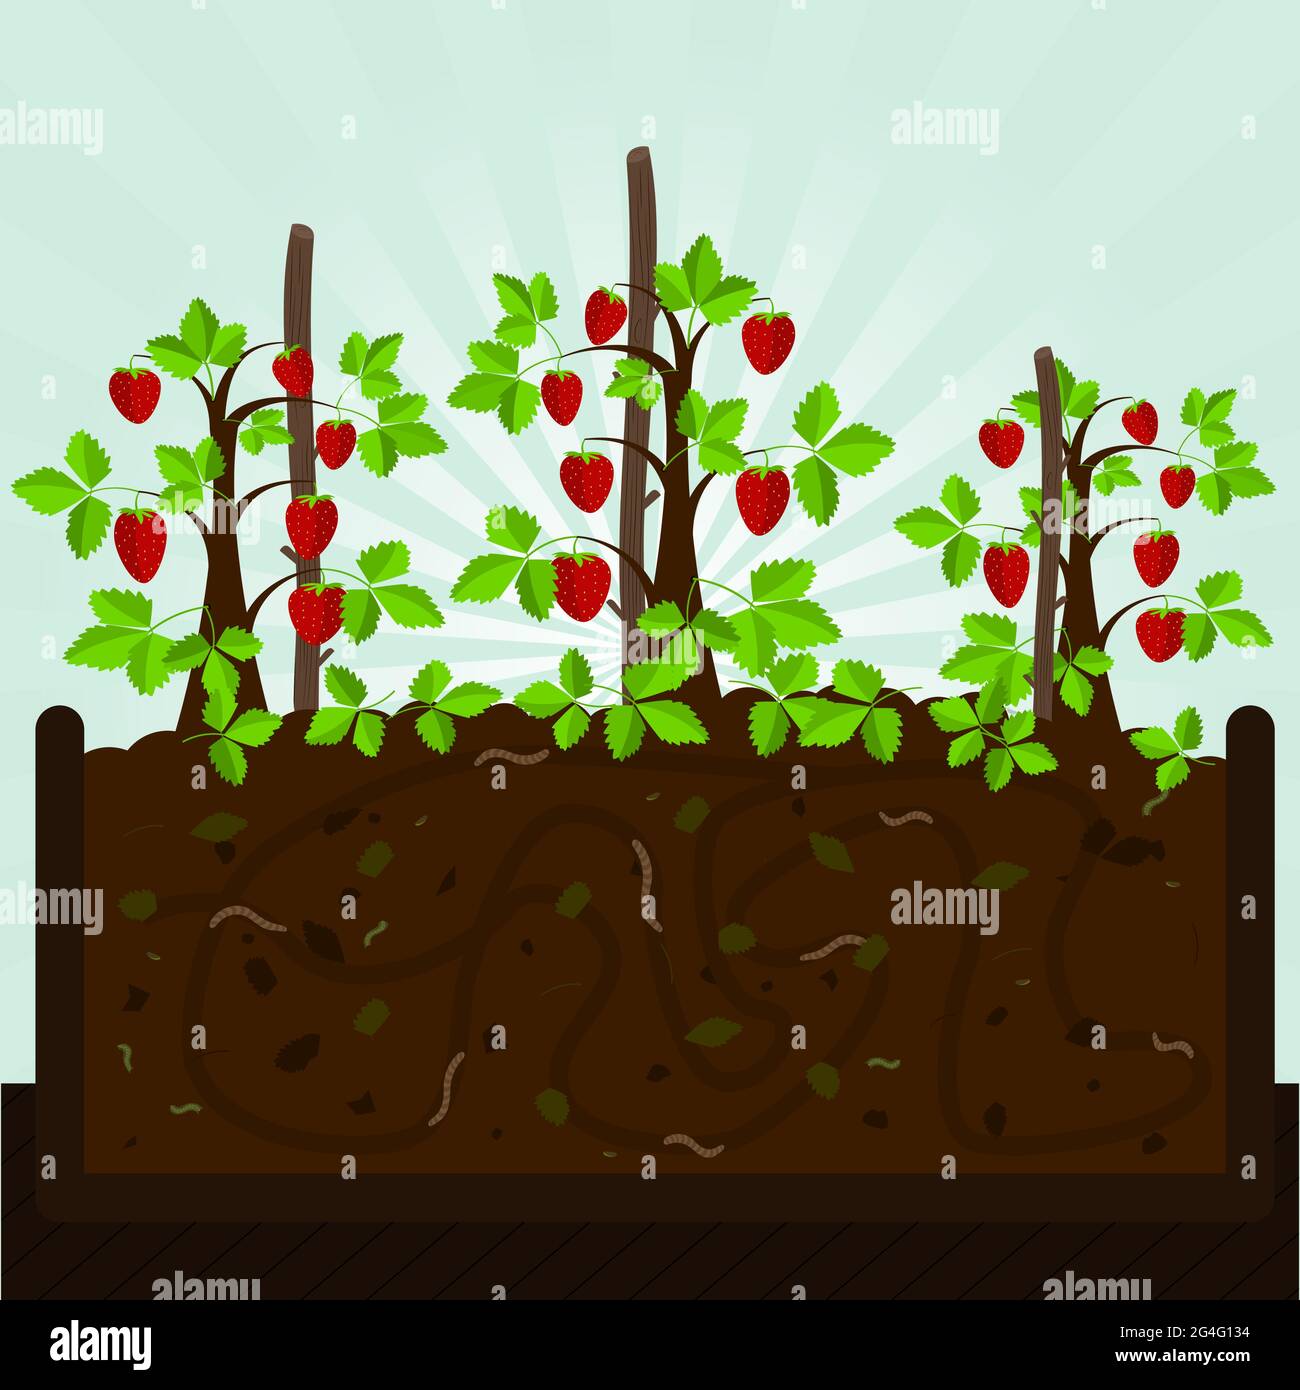 Strawberry trees. Composting process with organic matter, microorganisms and earthworms. Fallen leaves on the ground. Stock Vector